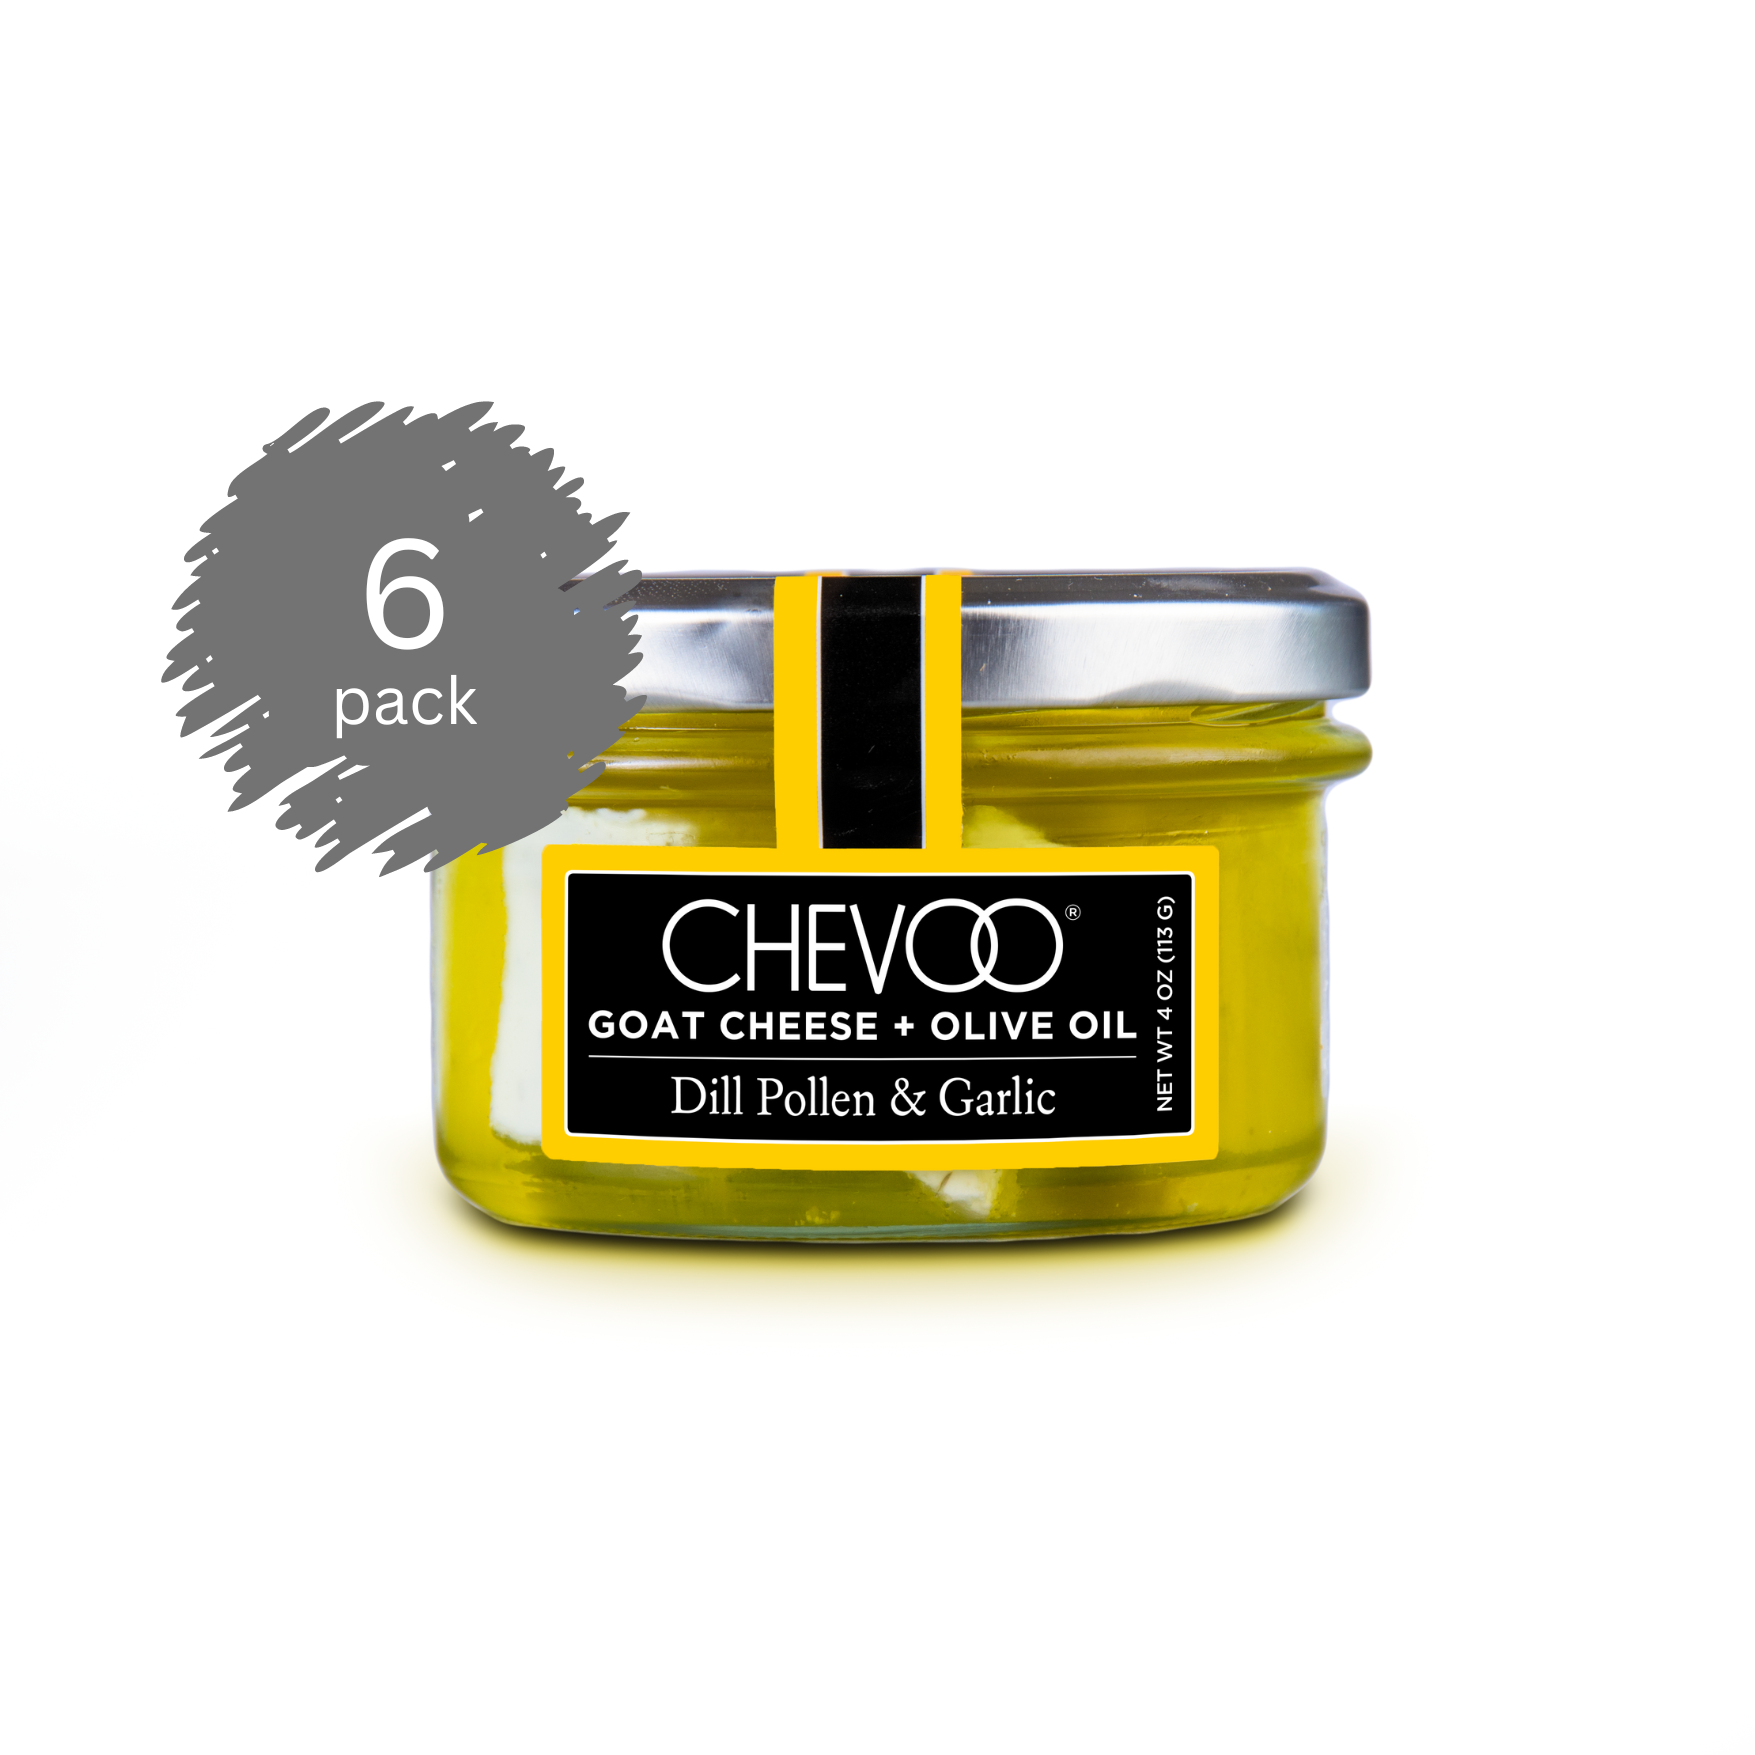 Wholesale - Chevoo Dill Pollen & Garlic Marinated Goat Cheese (case of 6)